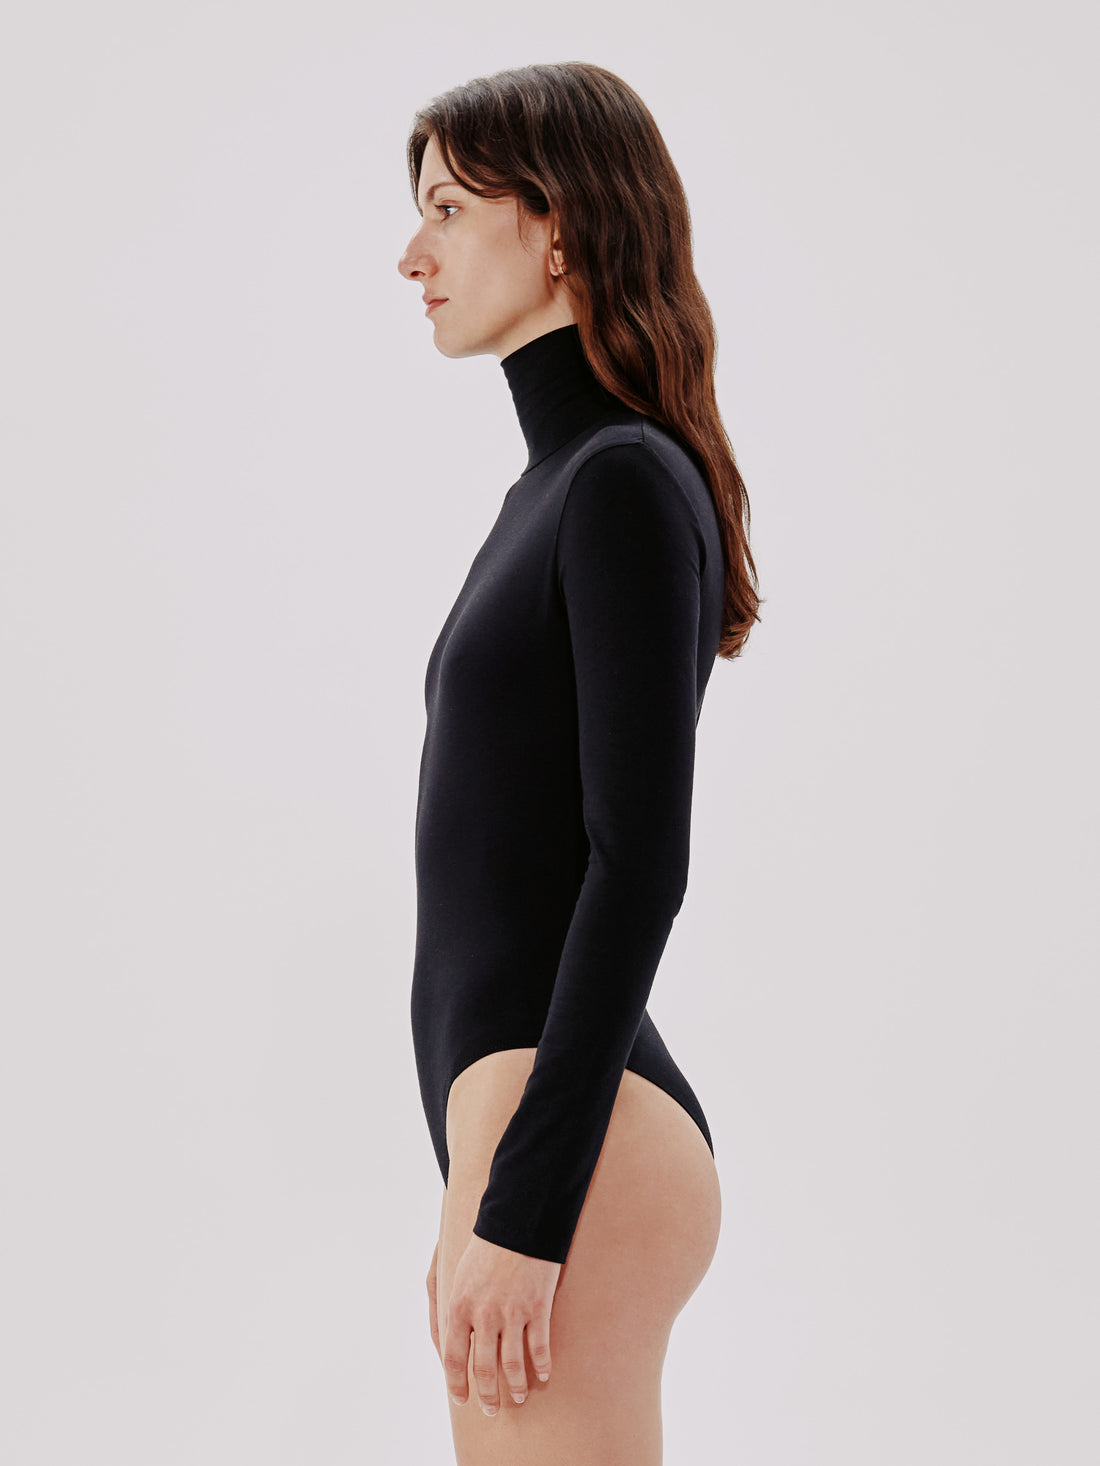 Organic Cotton Squareneck Bodysuit, 40 Stunning Gifts Your Stylish Friends  Will Fall in Love With — All Under $100